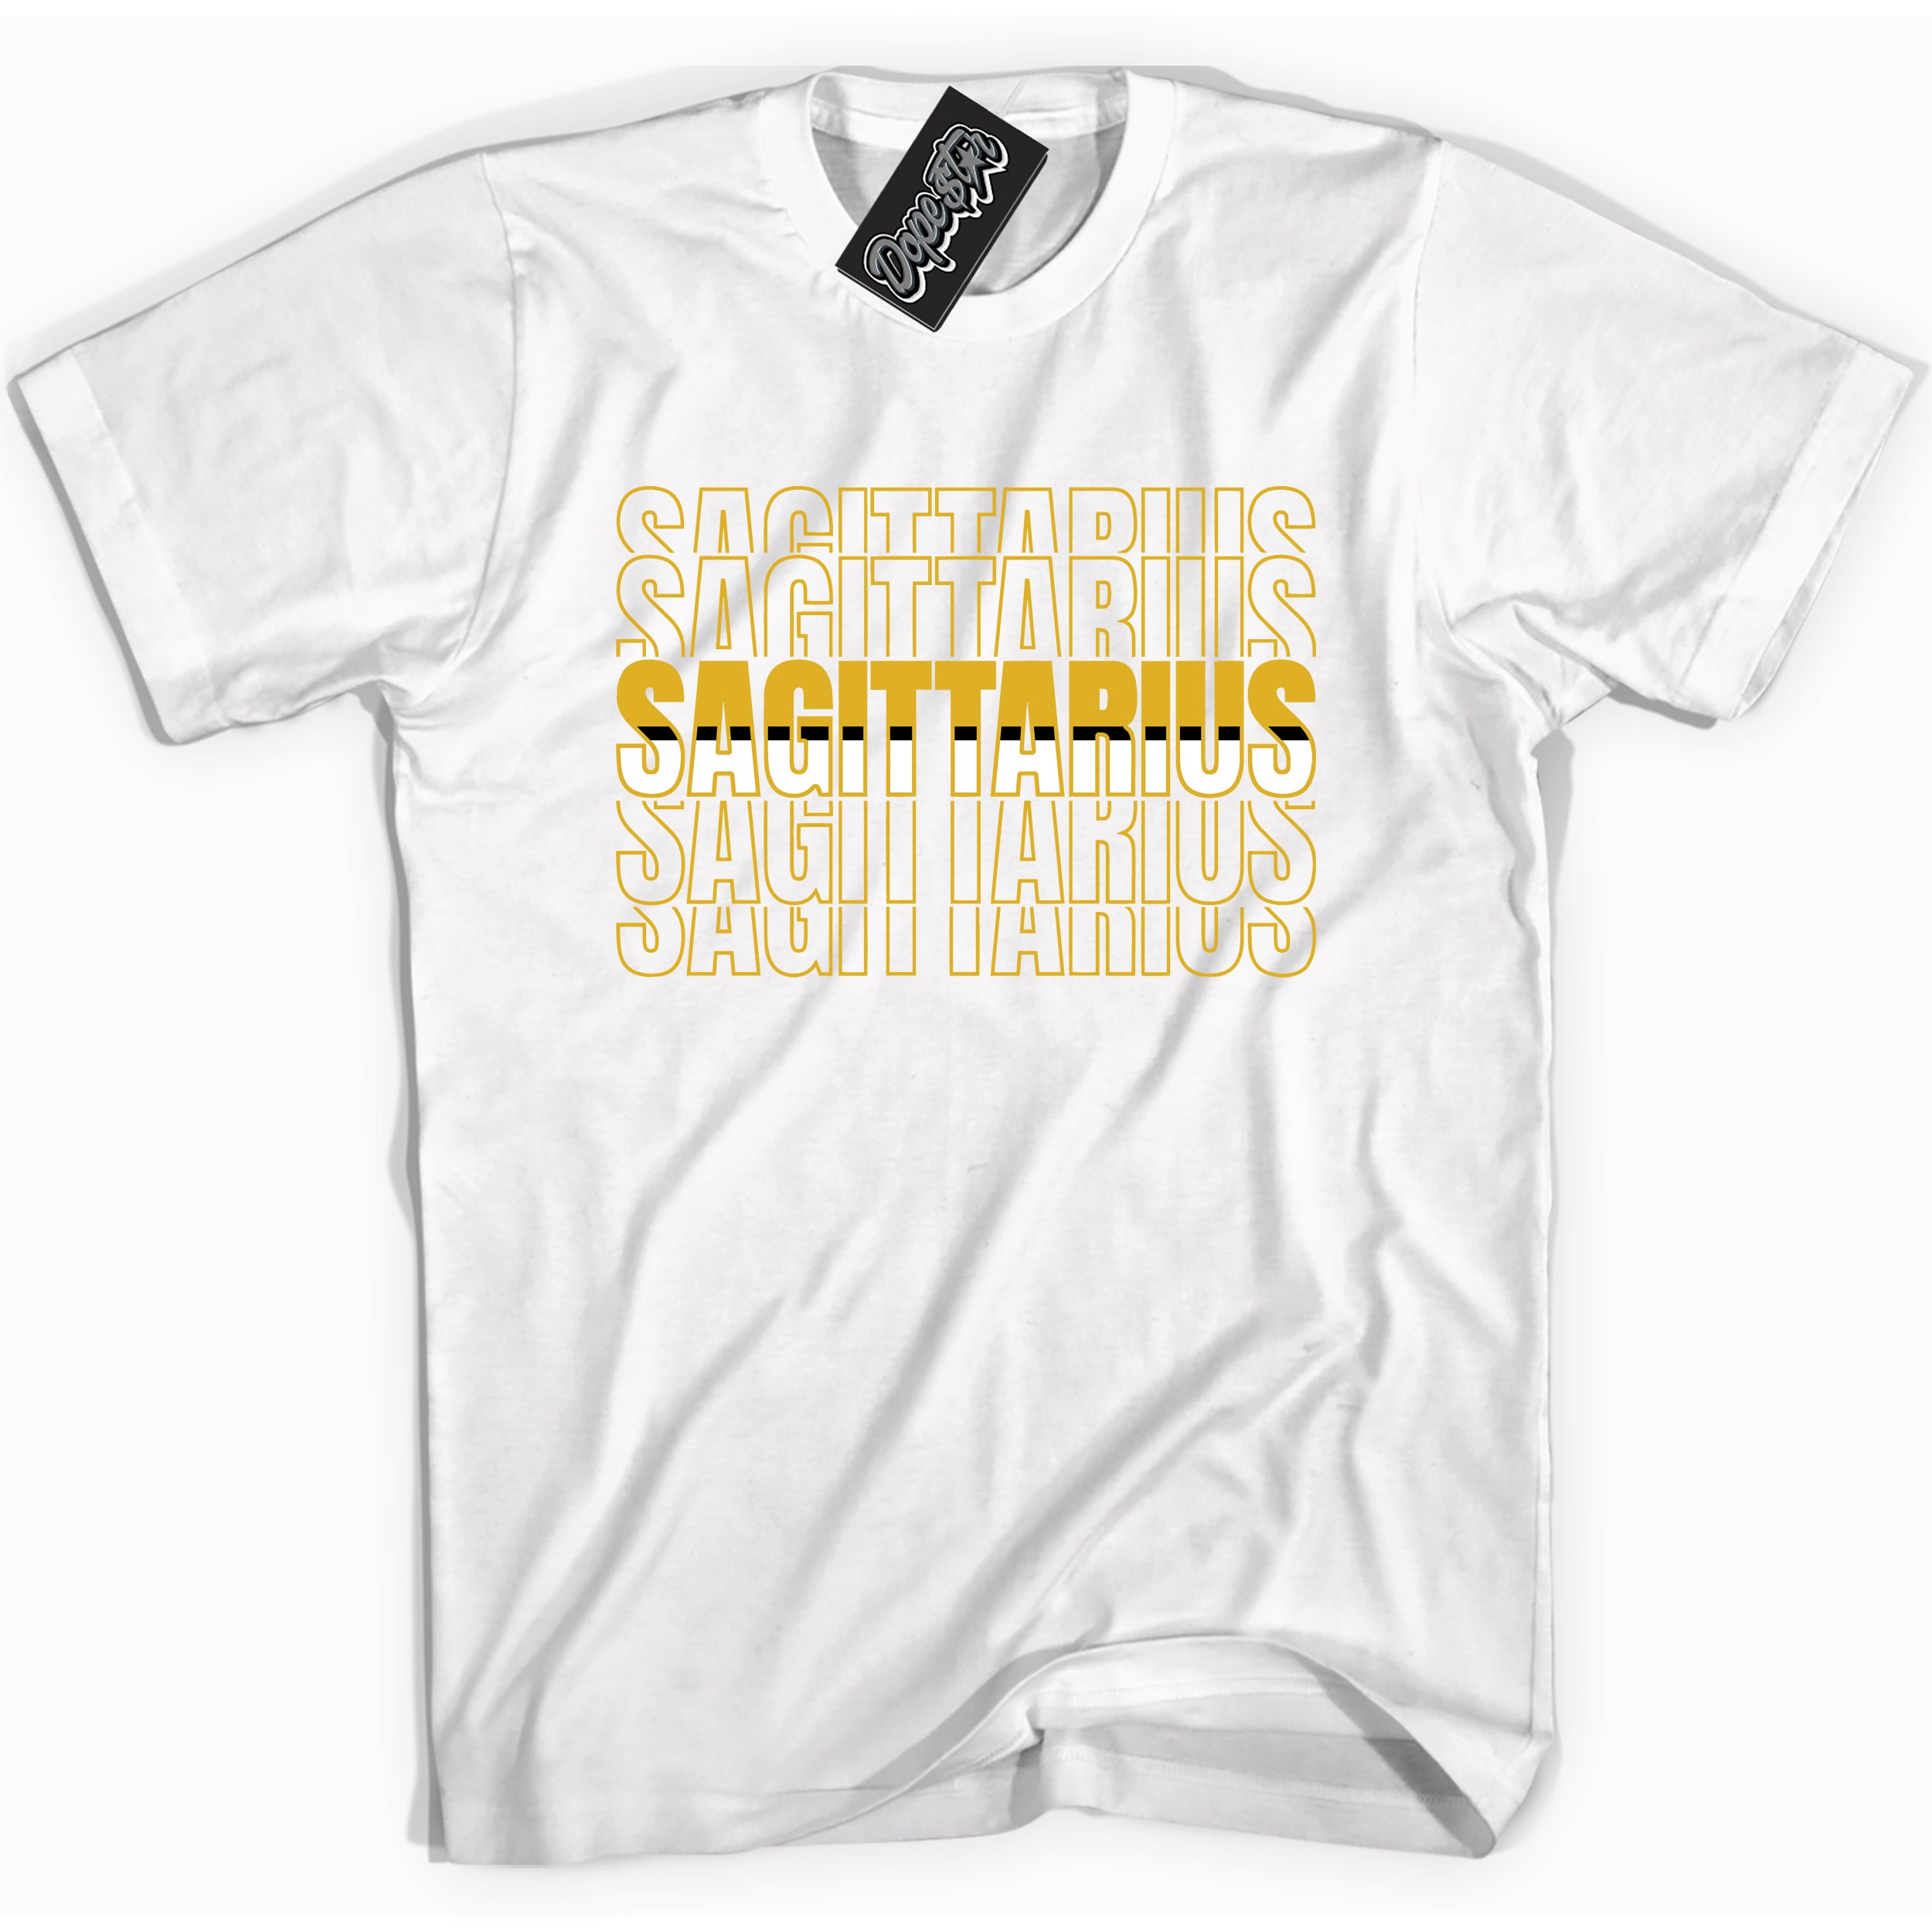 Cool White Shirt with “ Sagittarius” design that perfectly matches Yellow Ochre 6s Sneakers.